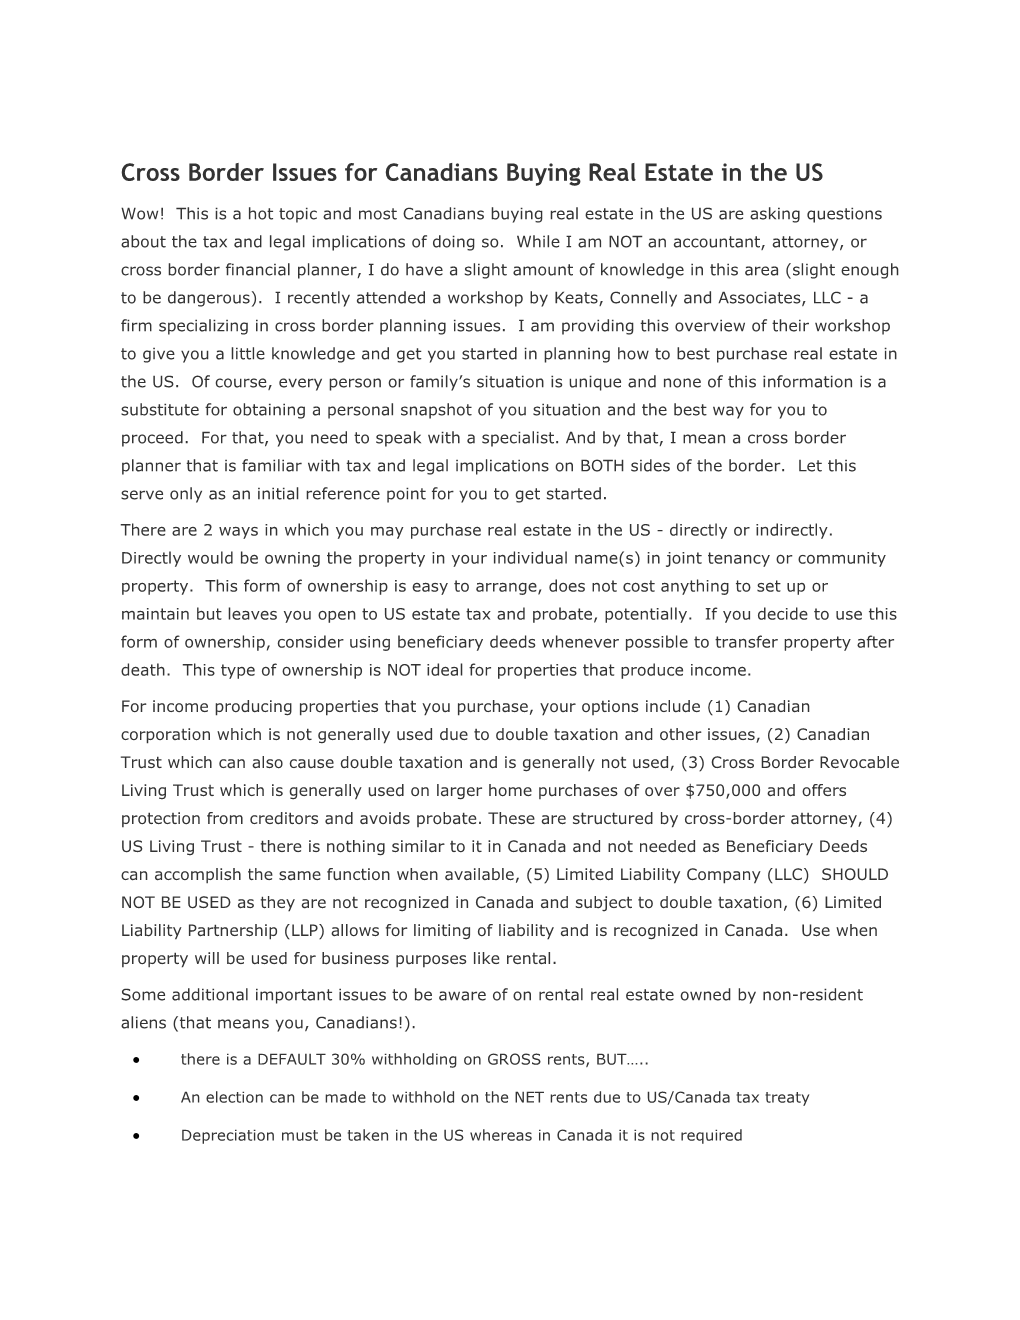 Cross Border Issues for Canadians Buying Real Estate in the US